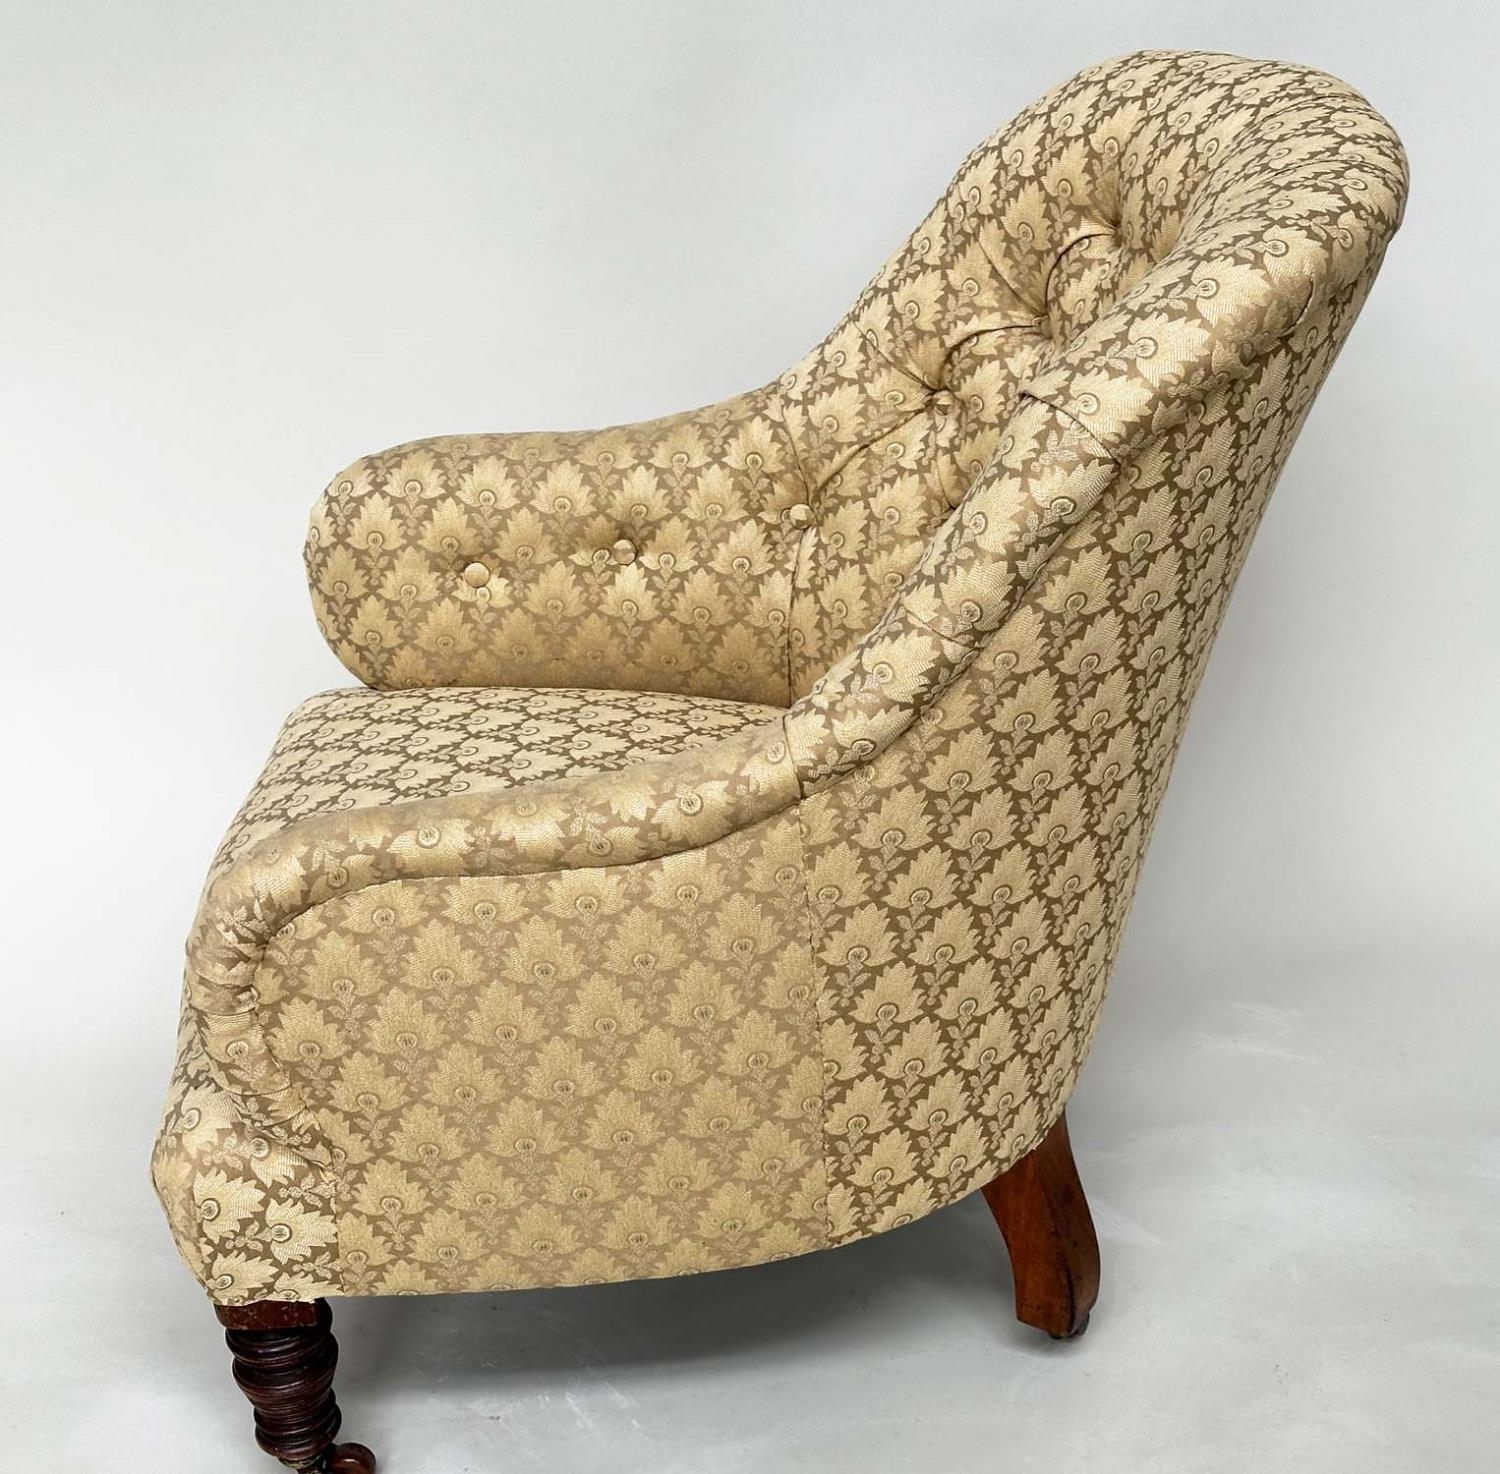 SLIPPER ARMCHAIR, 19th century walnut with two tone maple leaf print upholstery, 85cm H. - Image 10 of 10